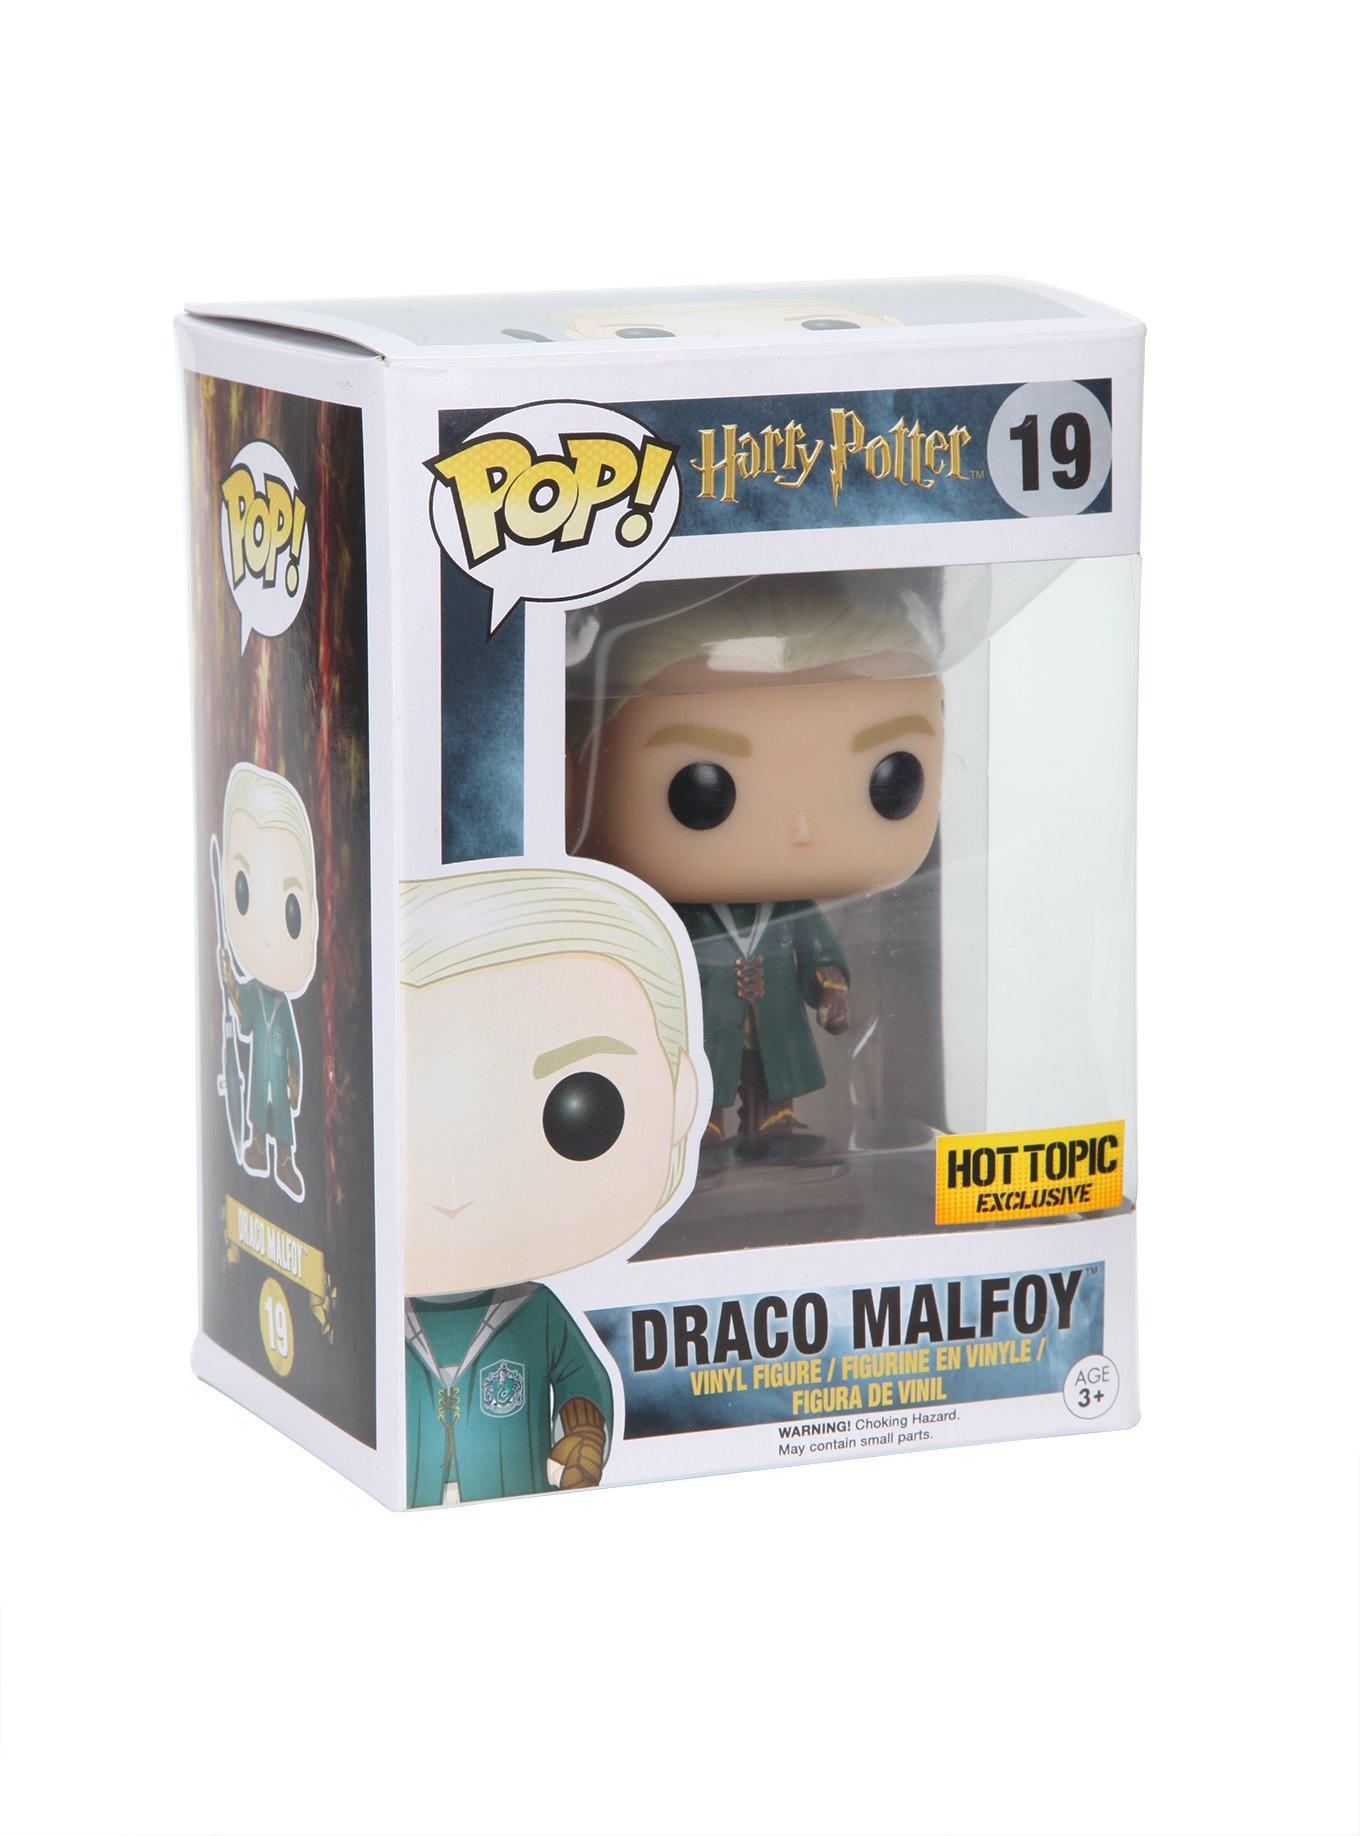 Funko Pop! Draco Malfoy Quidditch Broom #19 Harry Potter Special Edition